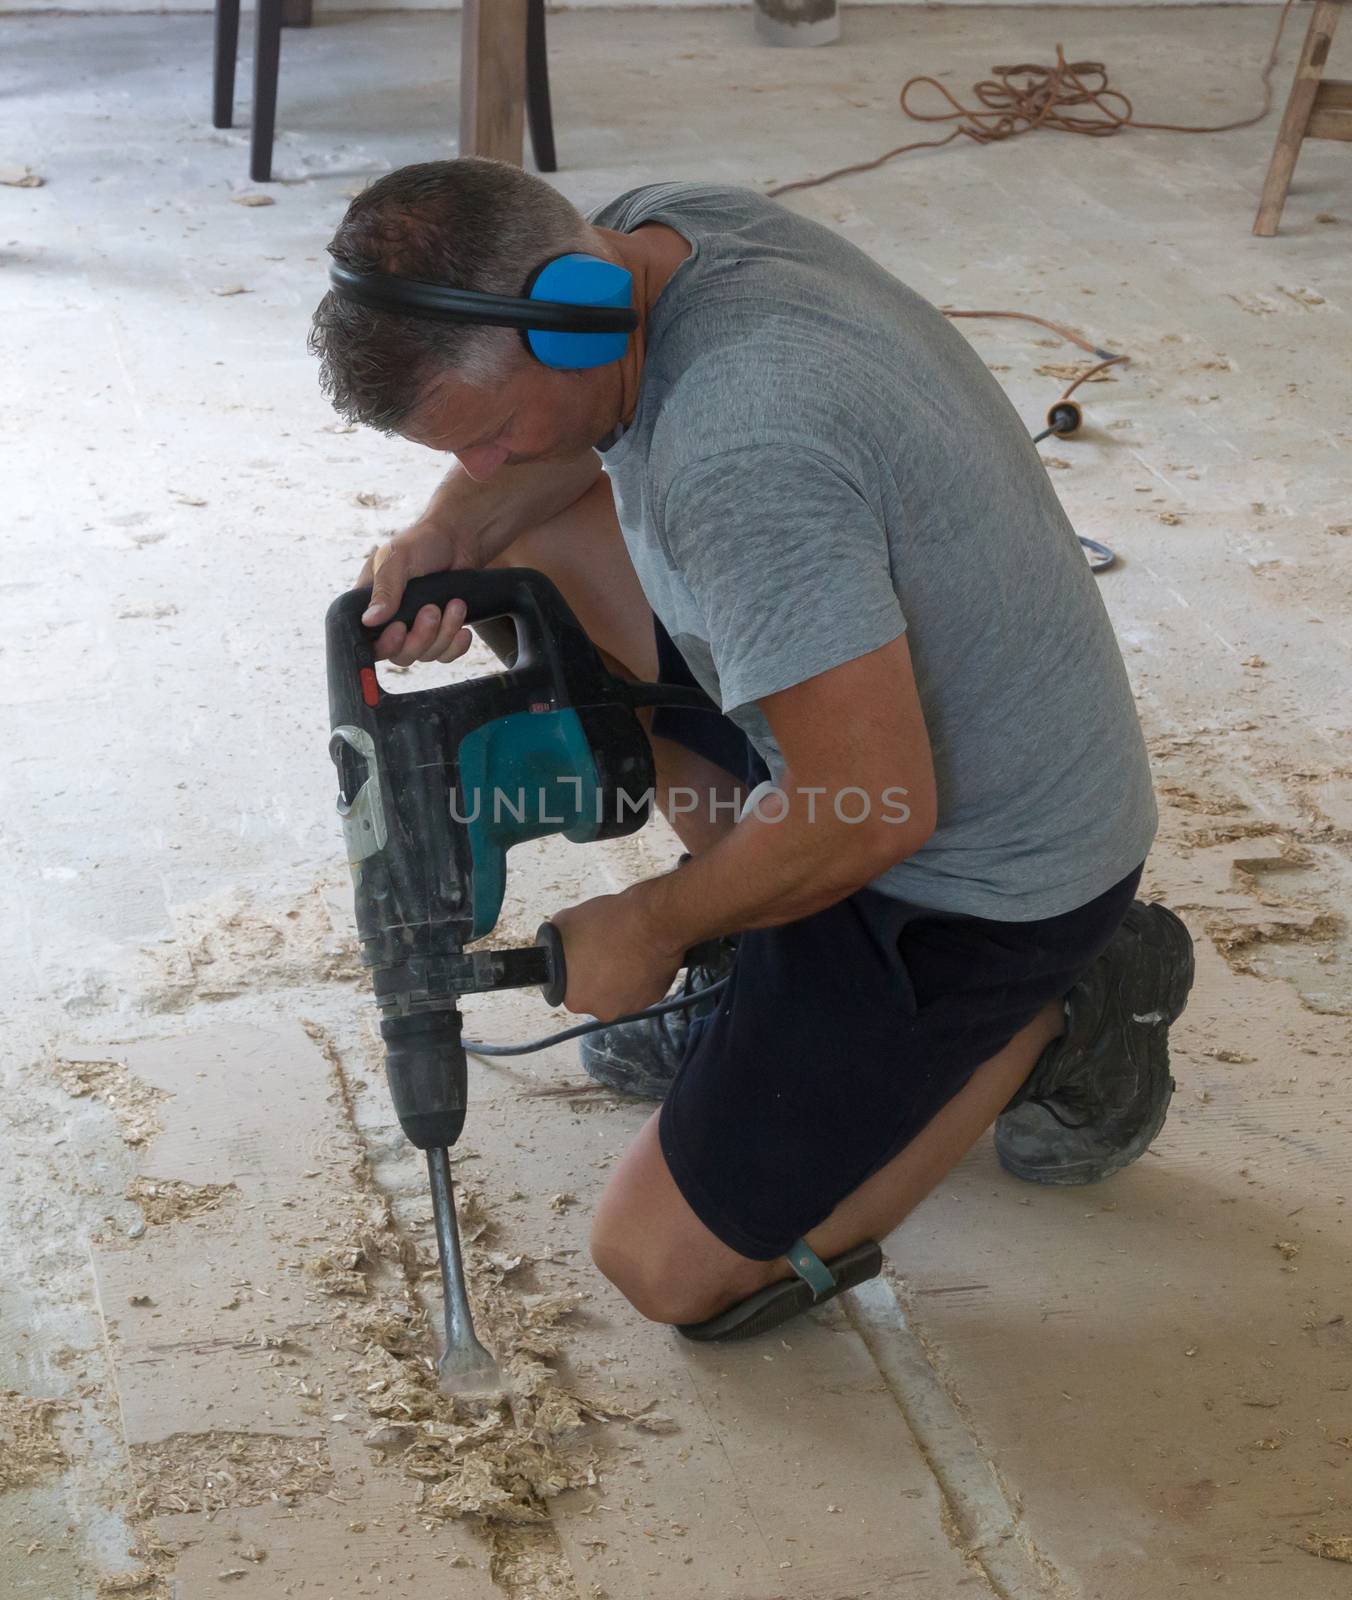 Construction concept - Jackhammer, removing chipboard from the floor - Selective focus